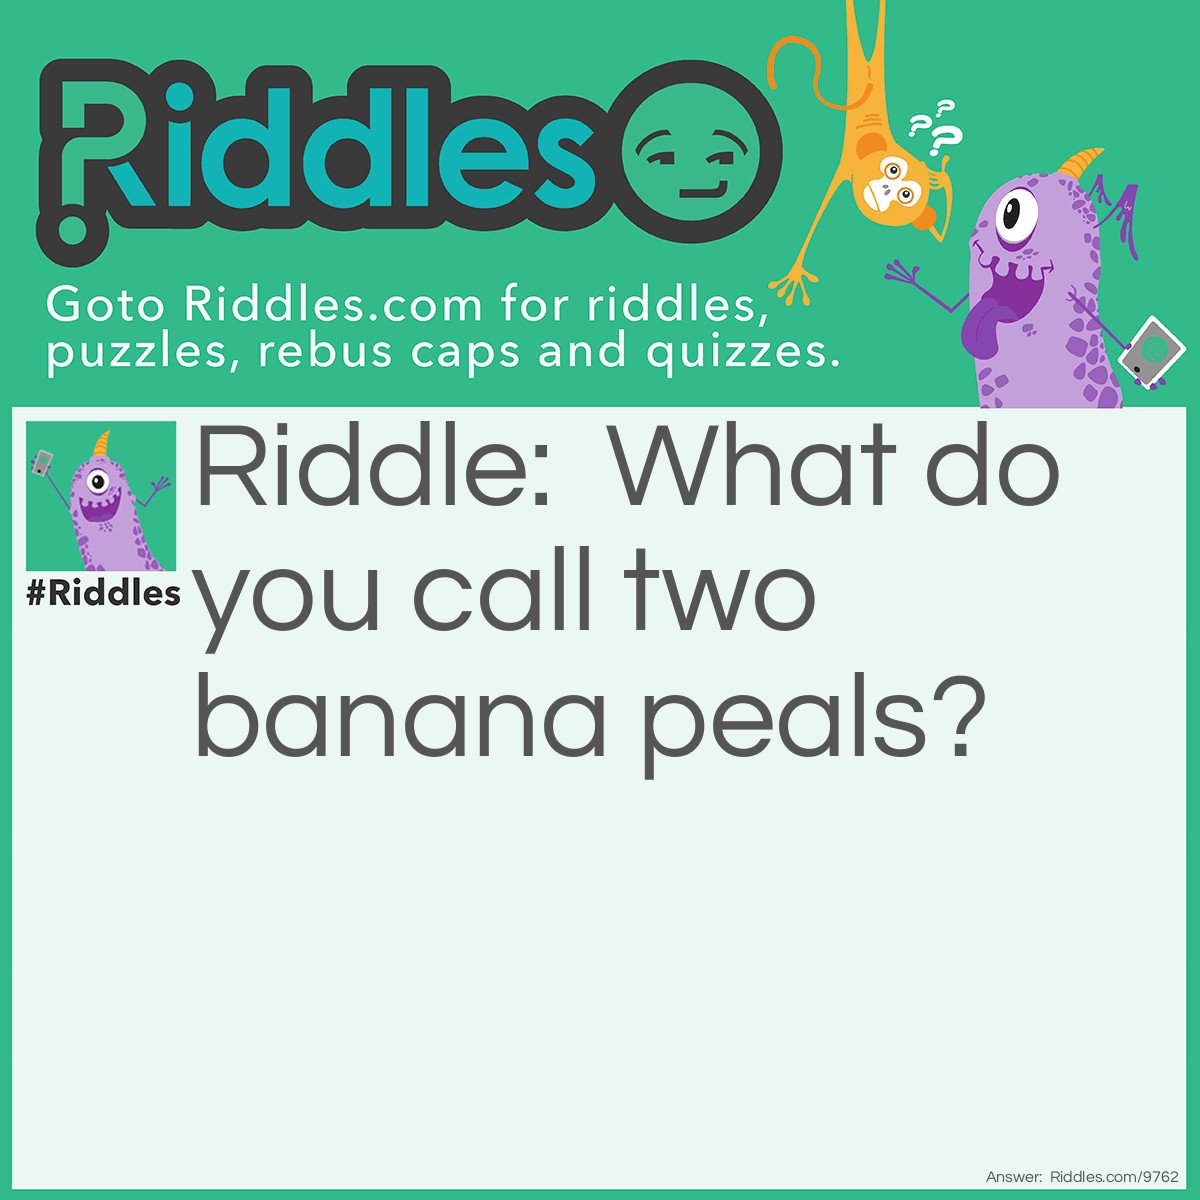 Riddle: What do you call two banana peals? Answer: Slippers!